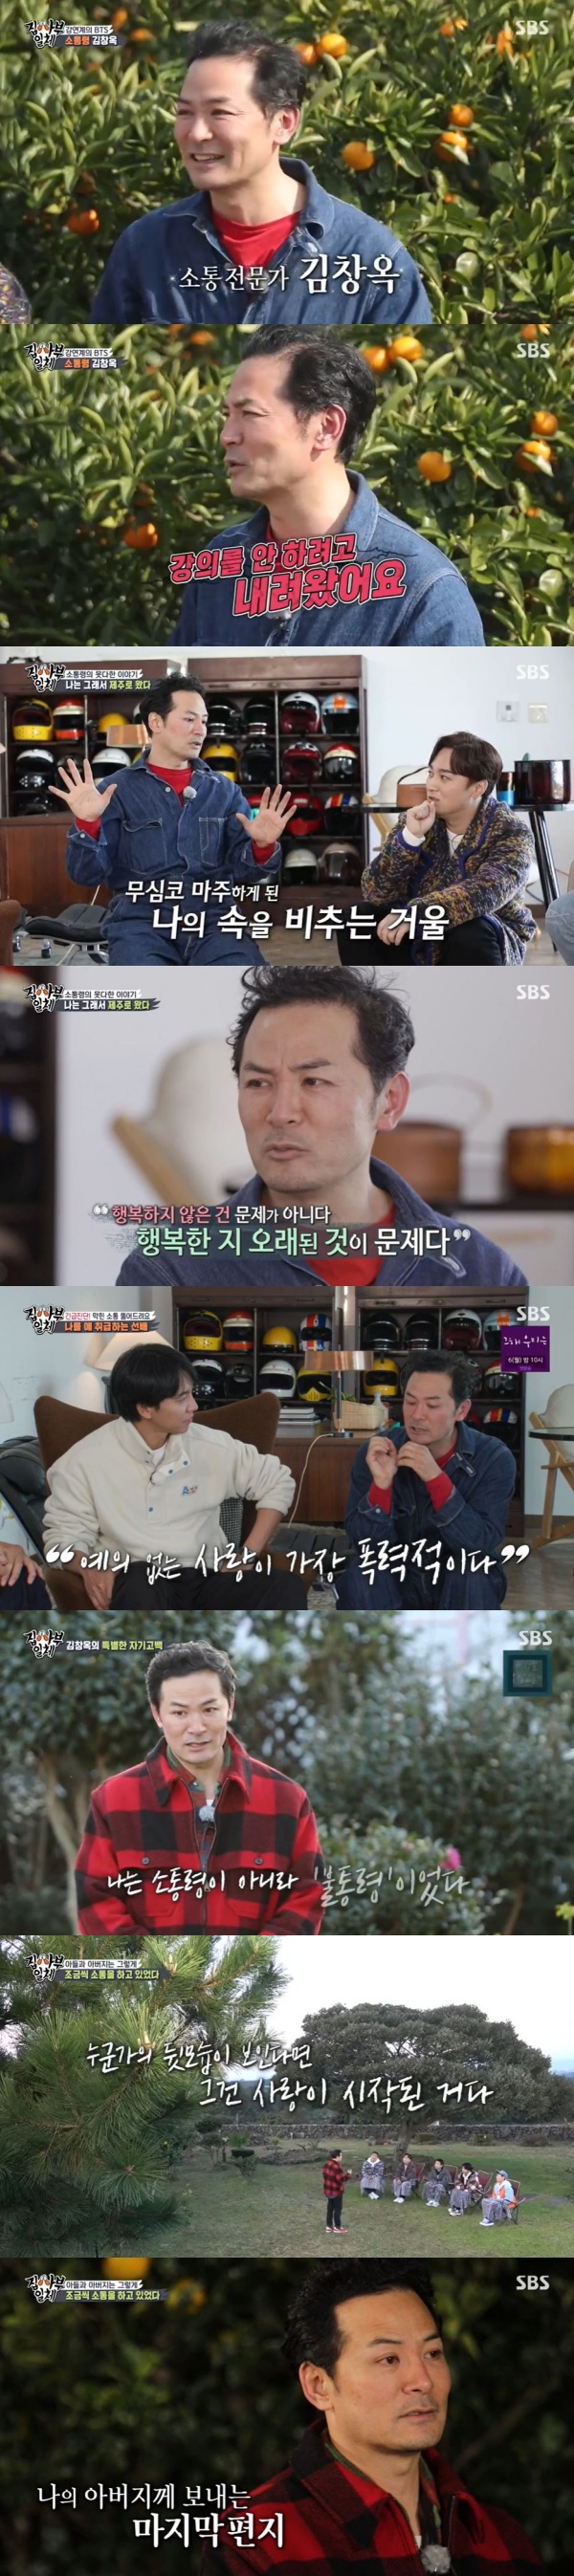 In the SBS entertainment program All The Butlers, which was broadcast on the 28th, Kim Chang-ok, a communication expert who conveys the meaning of true communication, was portrayed.Kim Chang-ok, a communication expert, appeared as master on the day. Kim Chang-ok confessed shockingly, I came down because I wanted to not lecture while working in Seoul. Lee Seung-gi said, Are you retiring?Kim Chang-ok replied seriously, It is a dream to retire. Then, There was a shock, he said. I will go home and tell you.Kim Chang-ok invited the members to his house, saying, Our garden is to open the window of mind toward nature and bring nature to the garden.Members looked around Kim Chang-oks house in earnest. Yang Se-hyeong asked, Why are there so many chairs?Kim Chang-ok said, The lecture is a matter of enlightenment. I thought (I prepared) that there was no comfortable chair for someone to sit in my mind.Kim Chang-ok told the house about many expensive items. If people are hungry, there is something that they misunderstand, he said. I think there is no object if emotions are hungry.At first, it was a shoe, he said. I felt bored and bought a variety of things, but I could not fill my emotional hunger because only the items went back.I recently learned how to fill my hungry emotions, Kim Chang-ok said. It means that time goes fast, he said. Brain feels fun when time goes fast.Brain, who has fun, is satisfied and stressful. He added, I realized that meeting people who go quickly is how to fill their emotional hunger. Kim Chang-ok revealed the occasion for Jeju Island: A middle school student who saw my lecture directly said, That person doesnt look happy.I was angry to hear that, she said.I realized that I was embarrassed because I was not angry, he said. It is not a problem that I did not have happiness, but it is a problem that I have been happy for a long time.Thats when a friend suggested a Jeju Island line, he confided.Kim Chang-ok said, People think that there is no problem with the soul if things go well. It is important to look back on themselves in the middle.Kim Dong-Hyun said, I think there is someone who can not communicate because of me.Lee Seung-gi was lucky to have someone who has difficulty communicating.I made my debut in 2004, he said. Some of the seniors who have seen me since my debut still treat me as a high school student.Yang Se-hyeong and Yoo Soo-bin laughed at the joke, Li Sun-hees master and Kang Ho-dong senior.Im worried about having to hang up because of that, Lee Seung-gi said.Kim Chang-ok said, Love without courtesy is the most violent. The first gateway to human relations seems to be courtesy, not love.If you are a healthy person, you will be more polite, he said.Meanwhile, Kim Chang-ok said, I was not a communication spirit, but a non-communicative spirit. He said, My father is deaf.If you drink, you have a fight with your mother, and if you do not drink, the conversation is disconnected. My father was a scary person to me, so I wanted to leave my hometown of Jeju Island since I was a child.Kim Chang-ok mentioned the improvement in his relationship with his father. My father apologized for being sorry, he said. I realized that my father had no power when I saw his apology.Kim Chang-ok said, My father changed because of that phone call.He came to see me, he said. When I saw my fathers Model, Back View, I thought, My father became an old man. I wrote, When I saw someones Model, Back View, love started. The relationship has since improved, he said.Kim Chang-ok said, My father is in a critical situation now. I have communicated with my father a little bit, so it is difficult to send my father, but I think I can send him without difficulty.If I did not, it would have been difficult and difficult. He said, The first treatment to treat the pain is sorry, he said. There can be no apology-free communication.Kim Dong-Hyun has been left blindfolded as she confides in her relationship with her father.Kim Chang-ok comforted Kim Dong-Hyun, saying, When I love someone, I understand the love I received.The lecture has been a great comfort, Yang Se-hyeong responded.Kim Chang-ok expressed his feelings about his father. I understood my father only after I got older, he said. I will live well with my mother.Meanwhile, All The Butlers is a life tutoring entertainment program with youths full of question marks and myway geek masters.It airs every Sunday at 6:25 p.m.Photo SBS broadcast screen capture